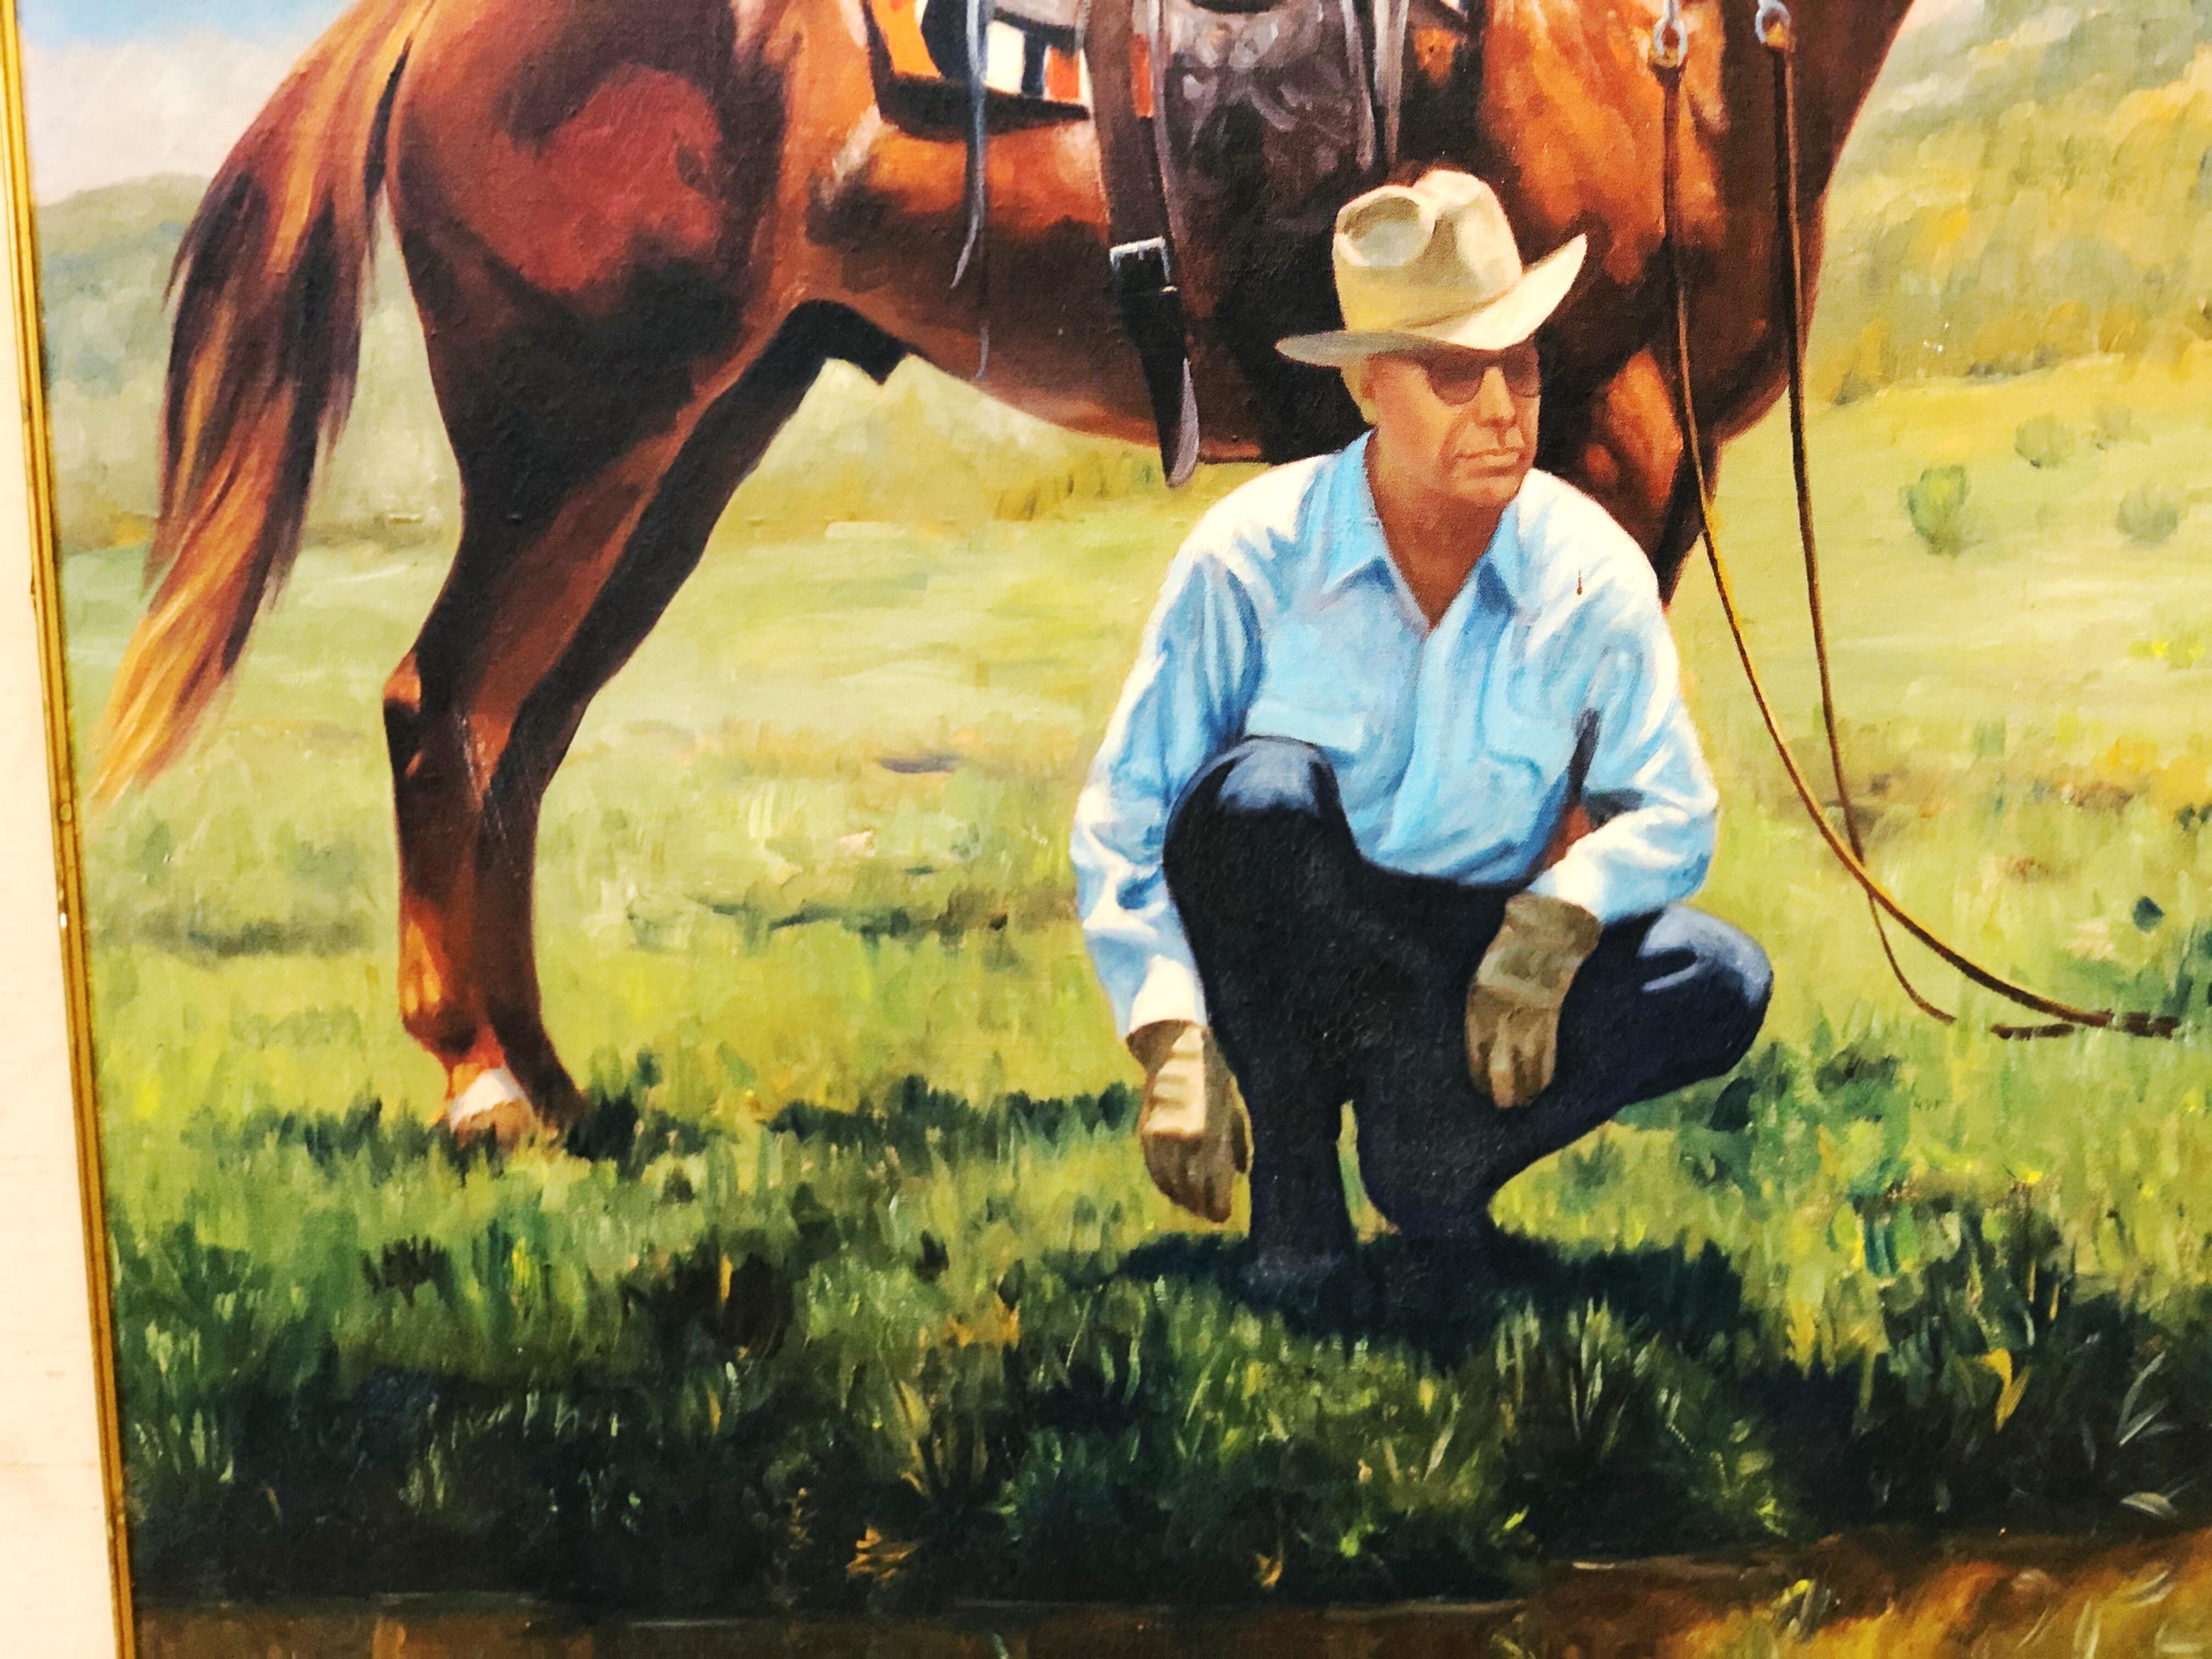 This vintage portrait-landscape painting by Harold Gore is in overall good condition. Some loss of finish on frame and mild discoloration of mat as seen in photos.
Bandera, Texas. 1962
Dimensions:
36